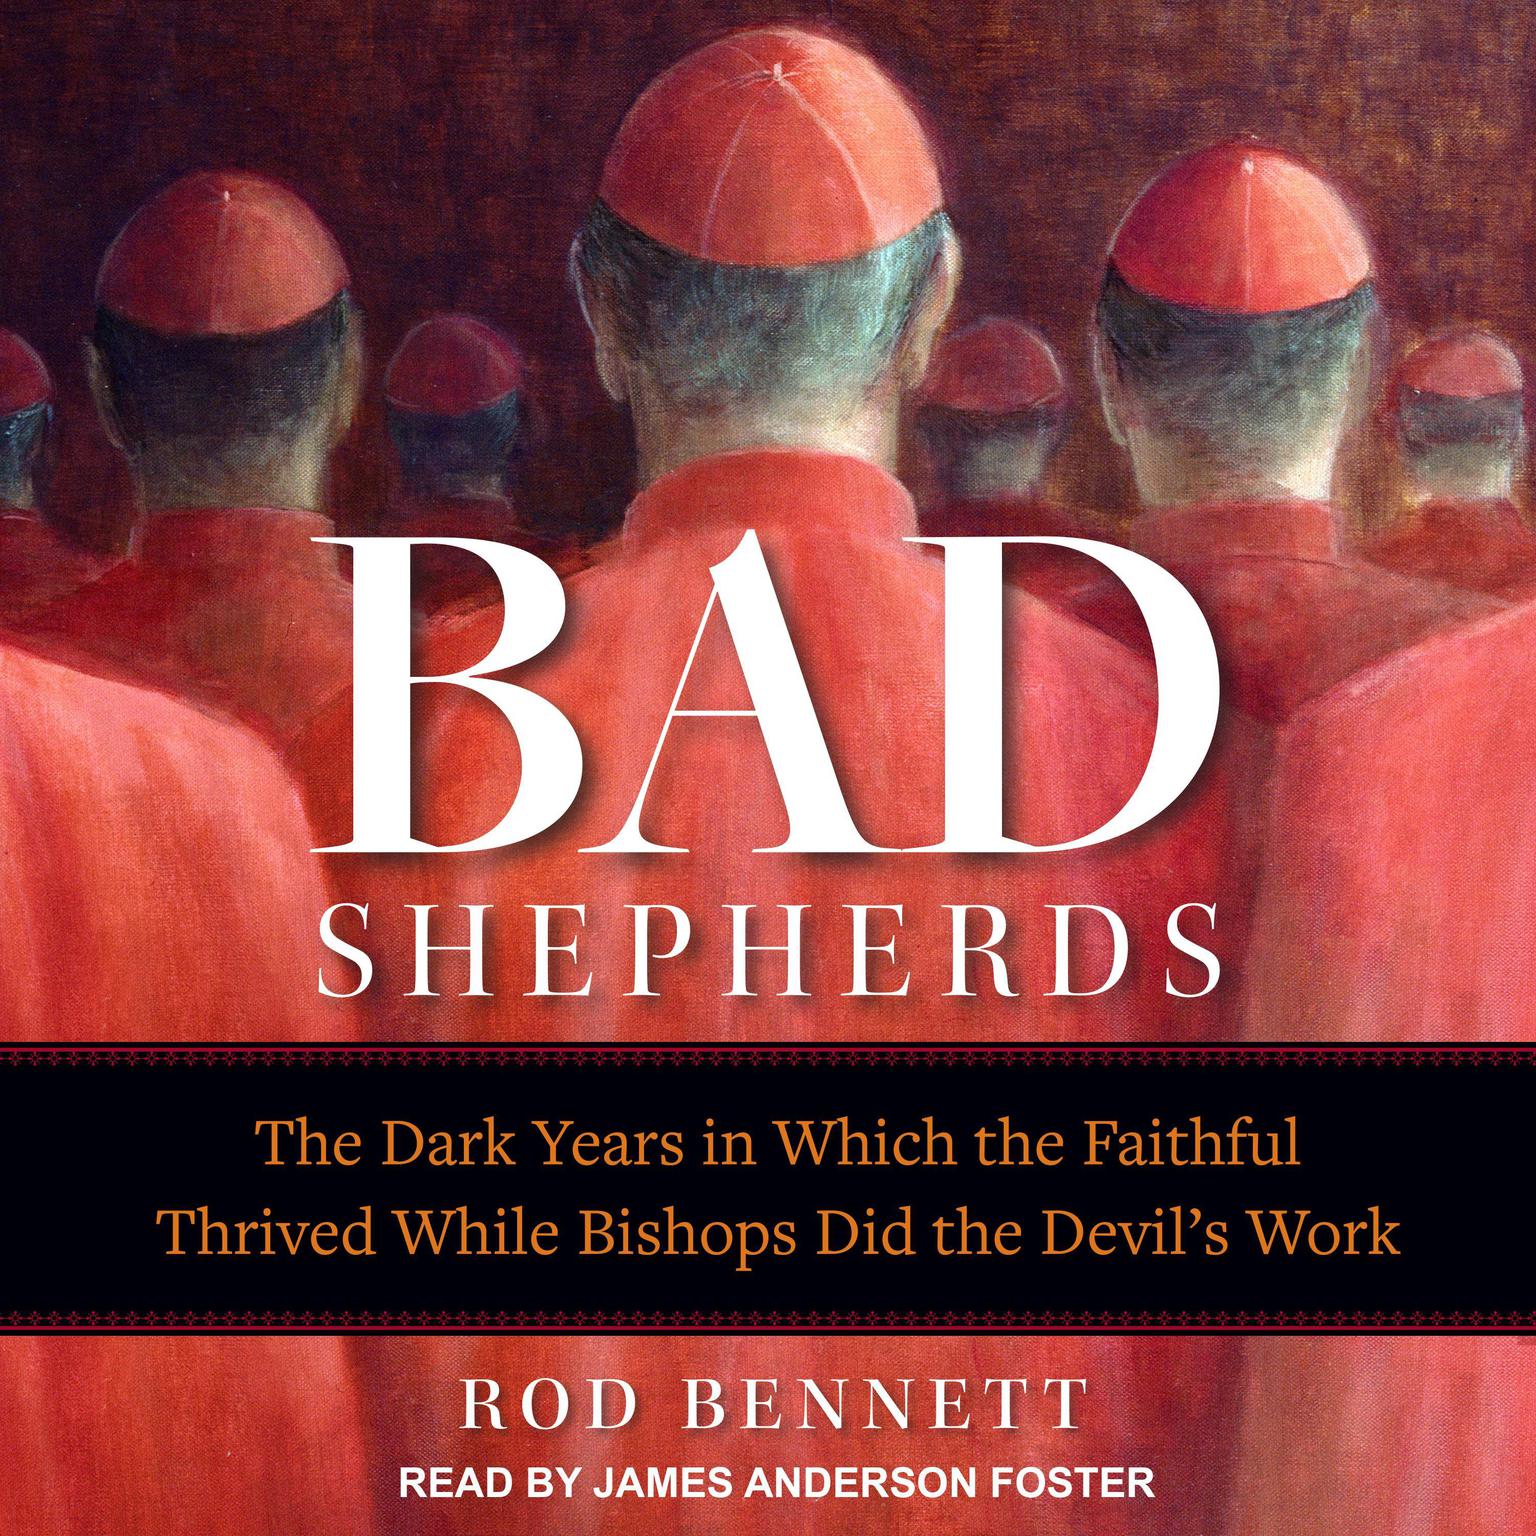 The Bad Shepherds: The Dark Years in Which the Faithful Thrived While Bishops Did the Devils Work Audiobook, by Rod Bennett